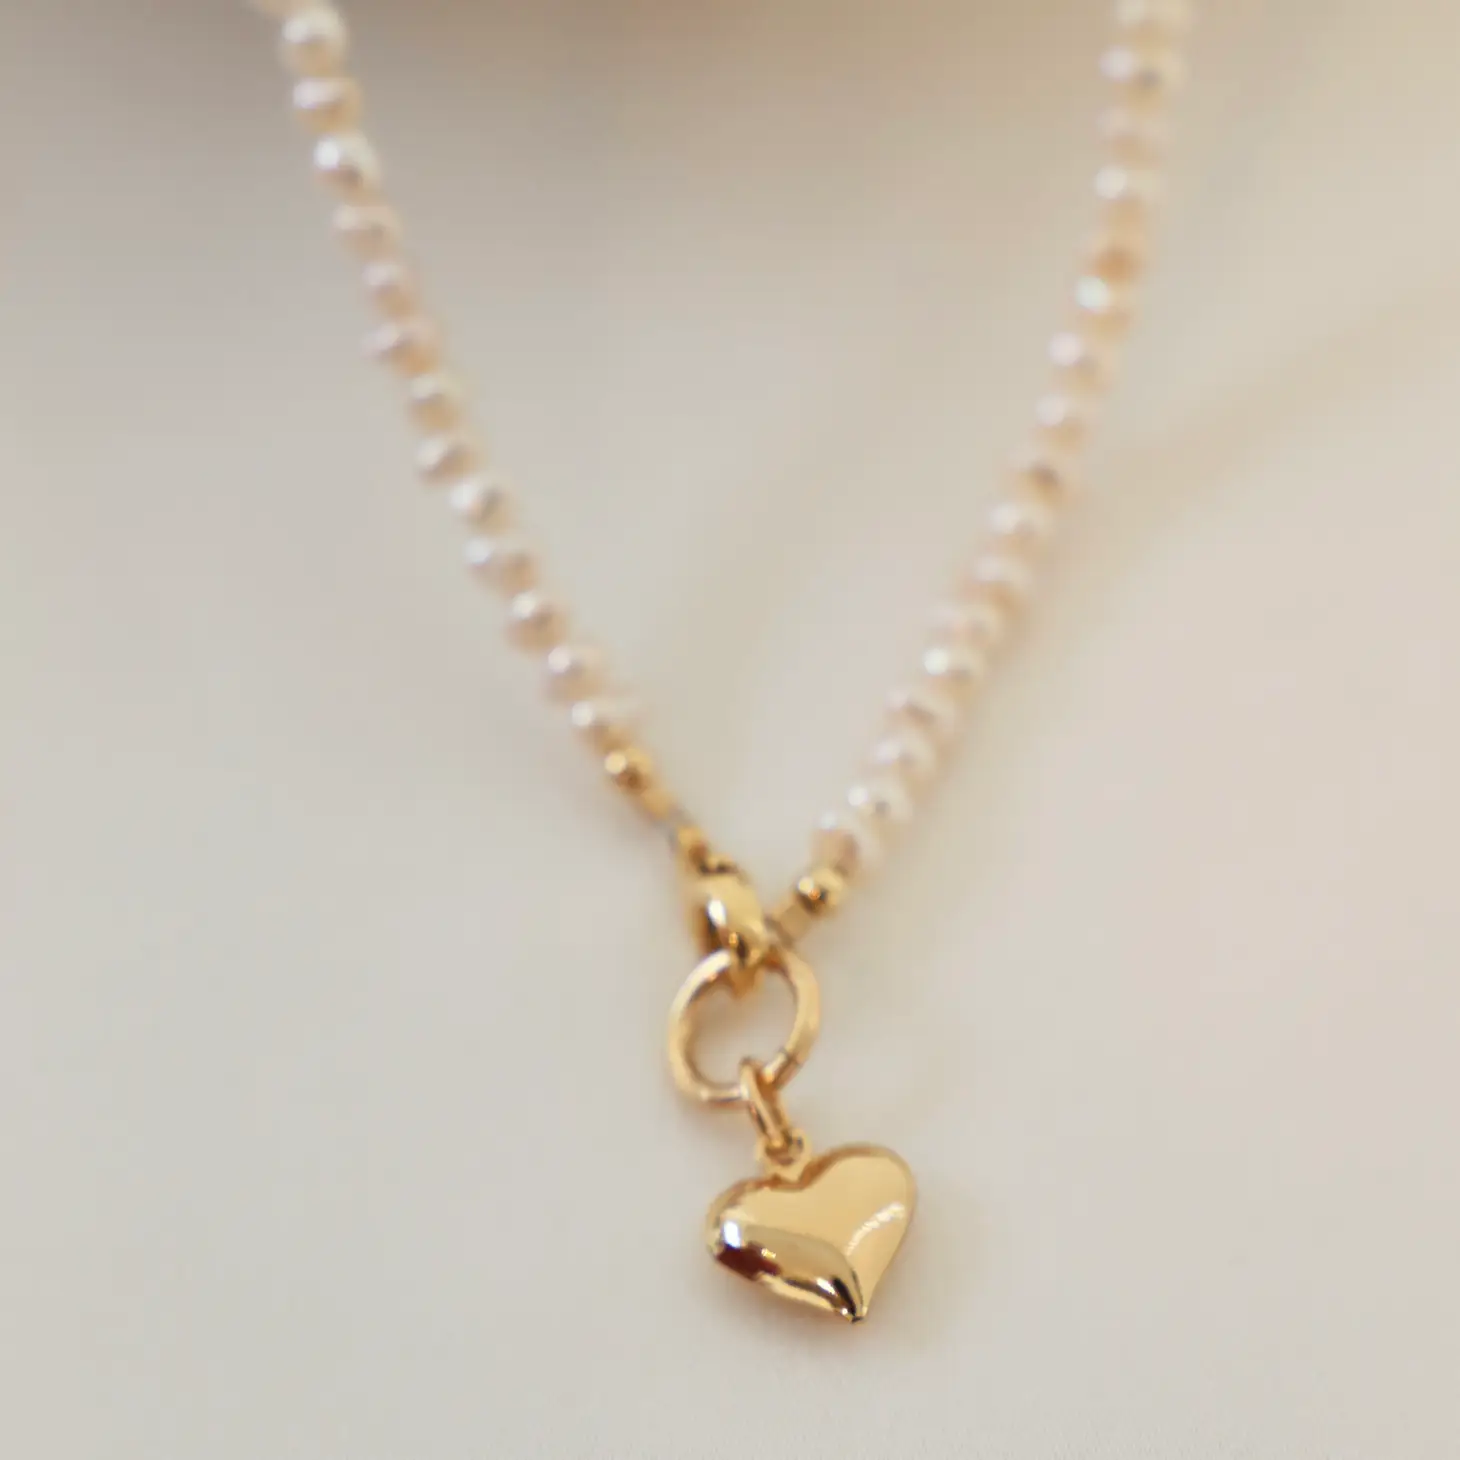 Katie Waltman - Heart and Freshwater Pearl necklace